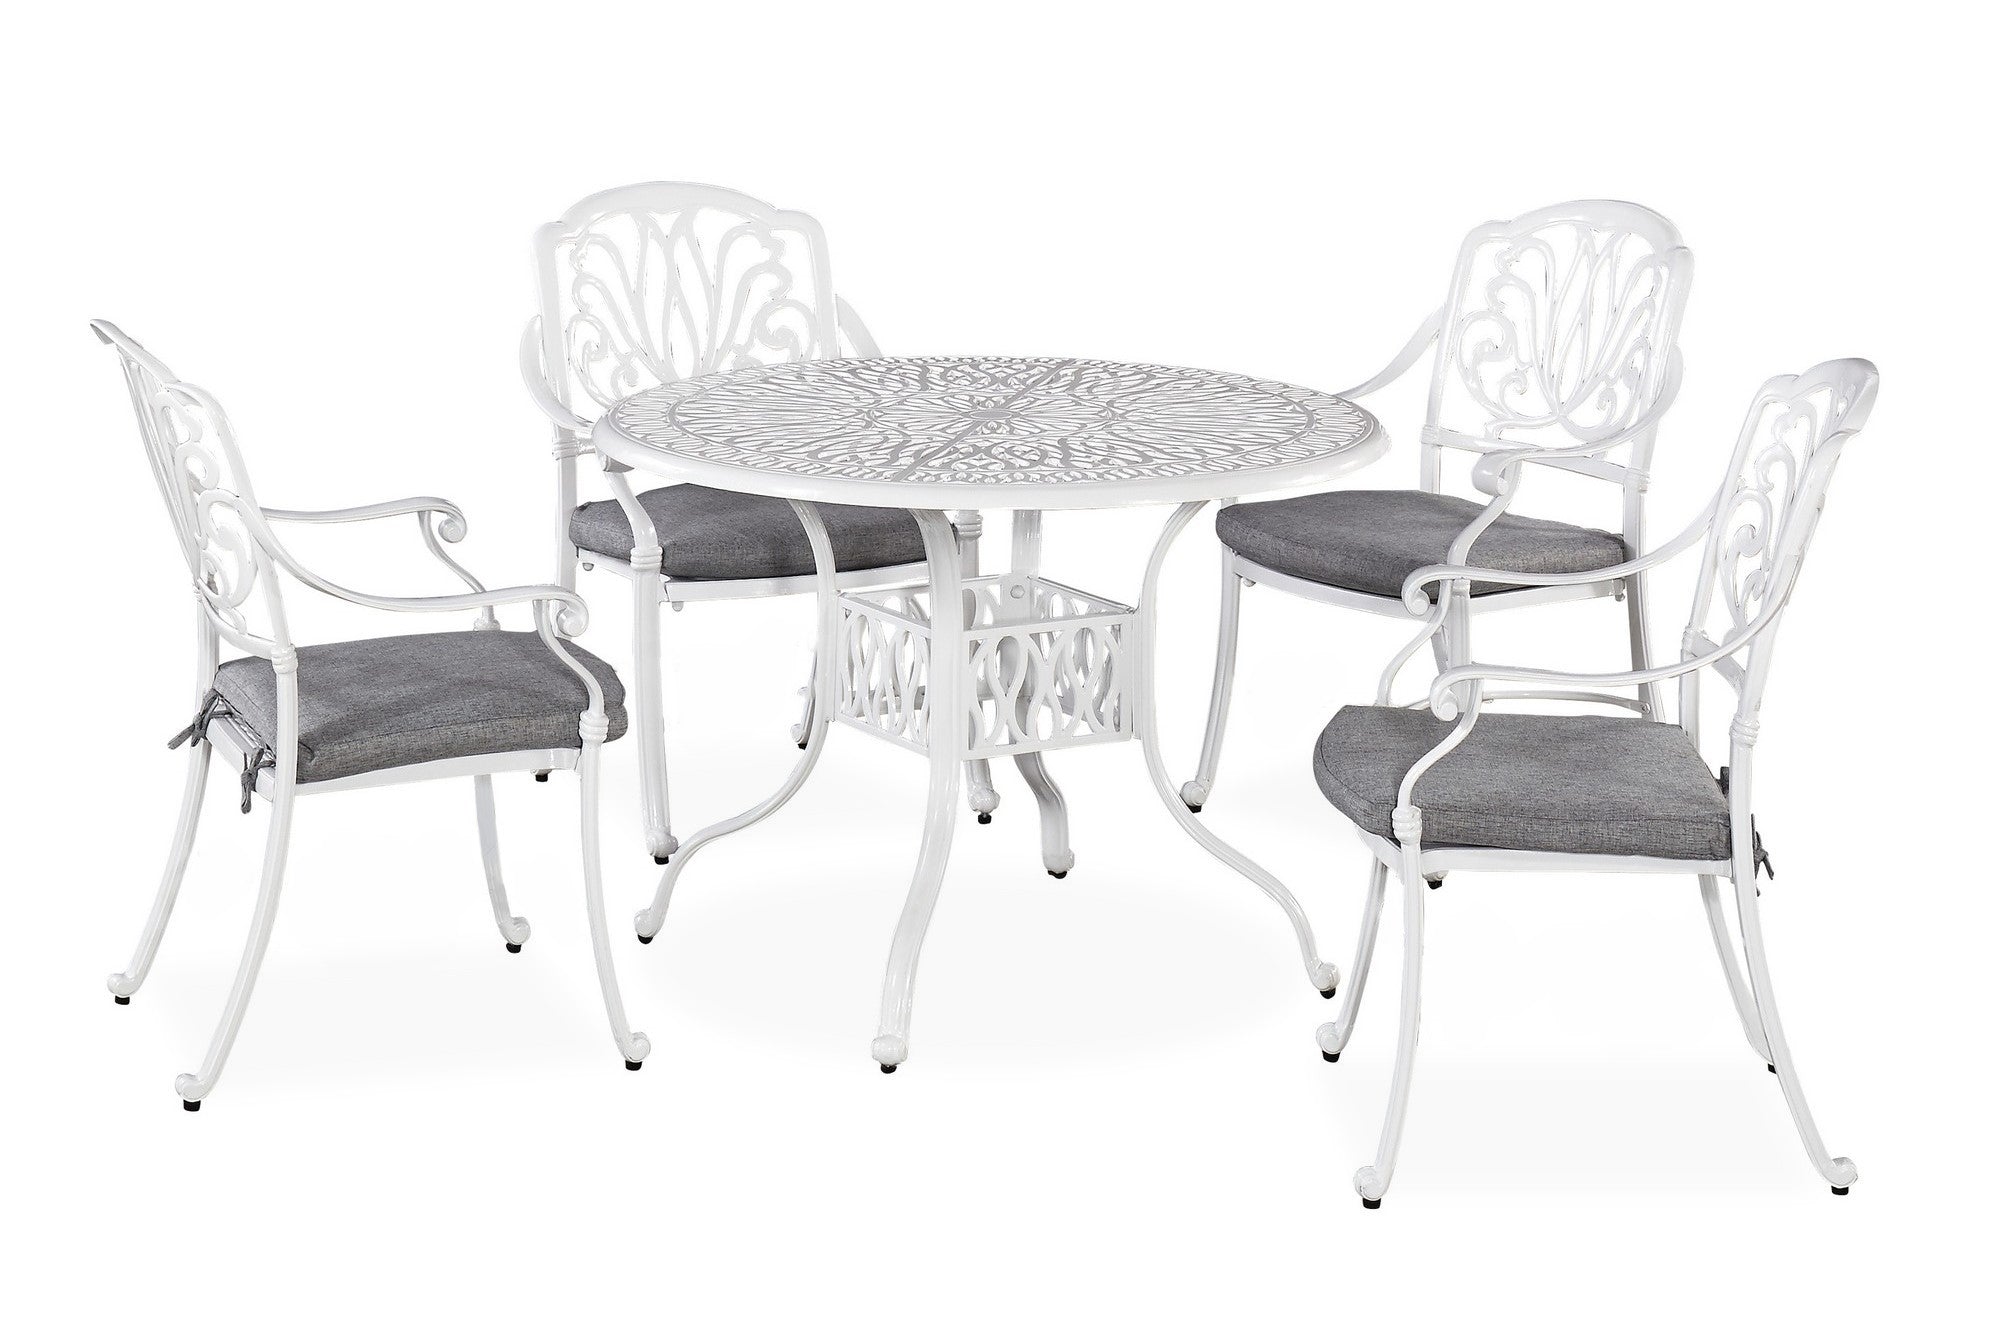 Capri 5 Piece Outdoor Dining Set by Homestyles - 6662-308